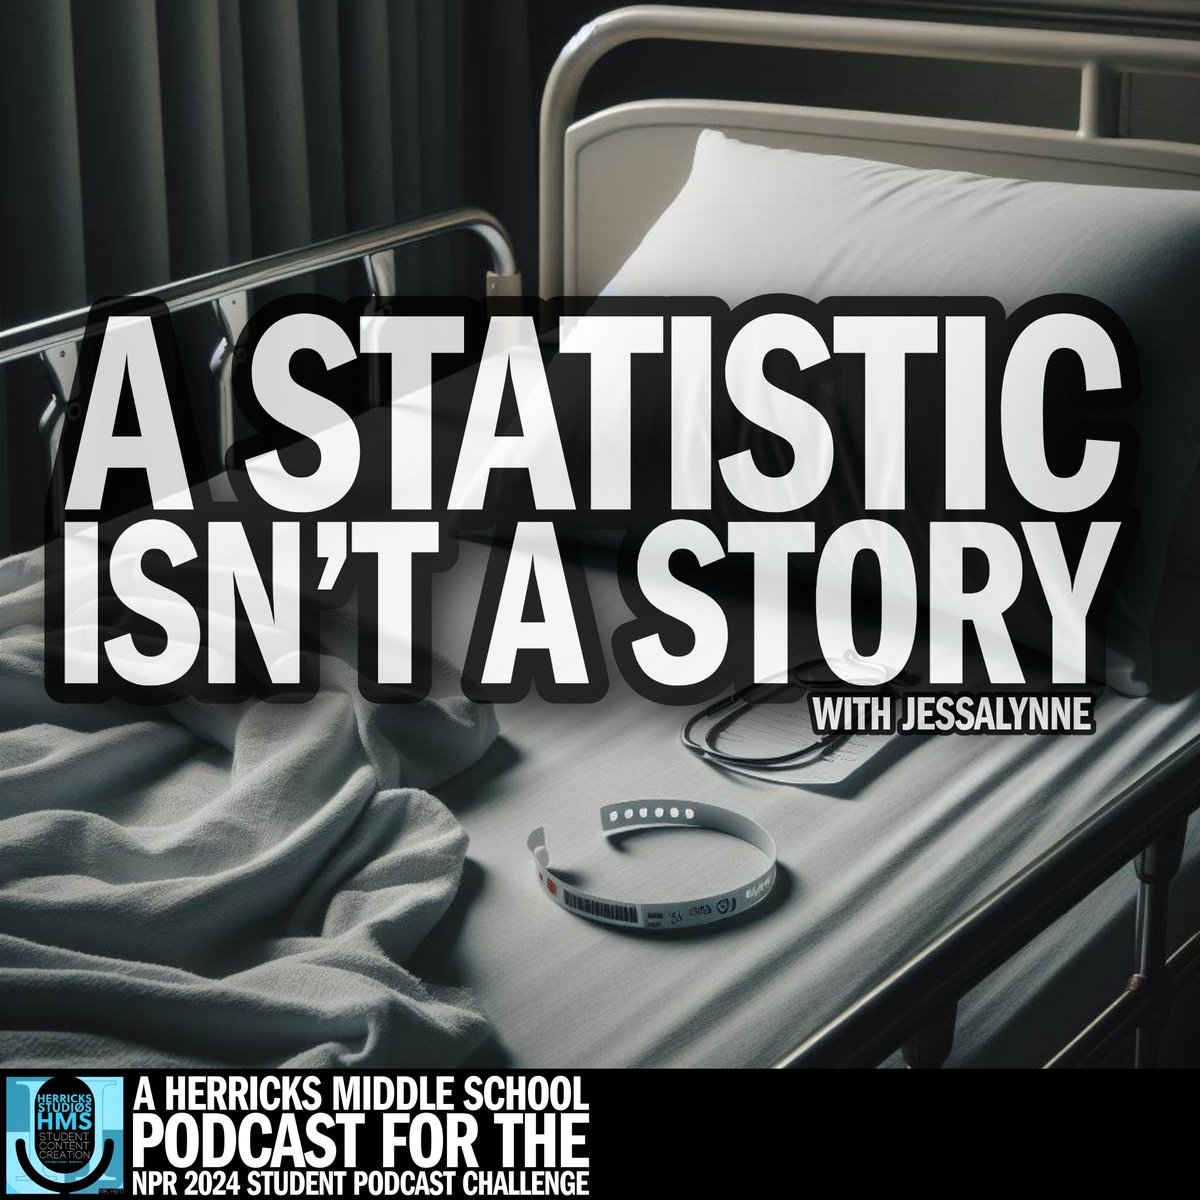 In S02E043: A Statistic Isn't a Story, Jessalynne spreads awareness of COVID through her personal loss. She lost her own mother in 2020 and this is her story. #WeAreHerricks @HerricksSup @HerricksMS1 @HerricksSchools 
open.spotify.com/episode/0eDbhd…